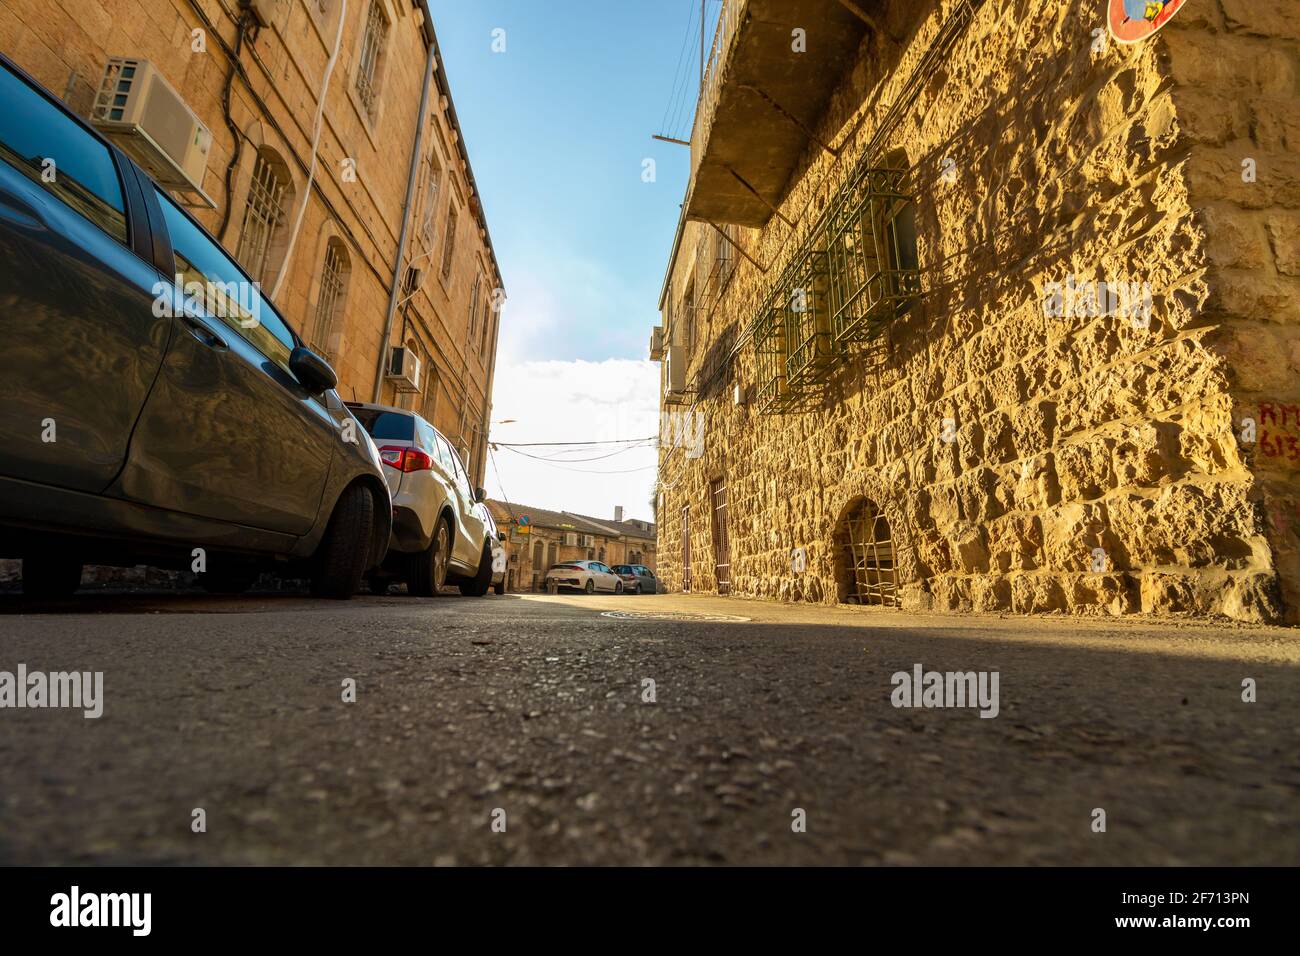 jerusalem-israel. 05-03-2021. Vehicles are parked near crowded houses in a narrow alley in the famous neighborhood of Nachlaot Stock Photo